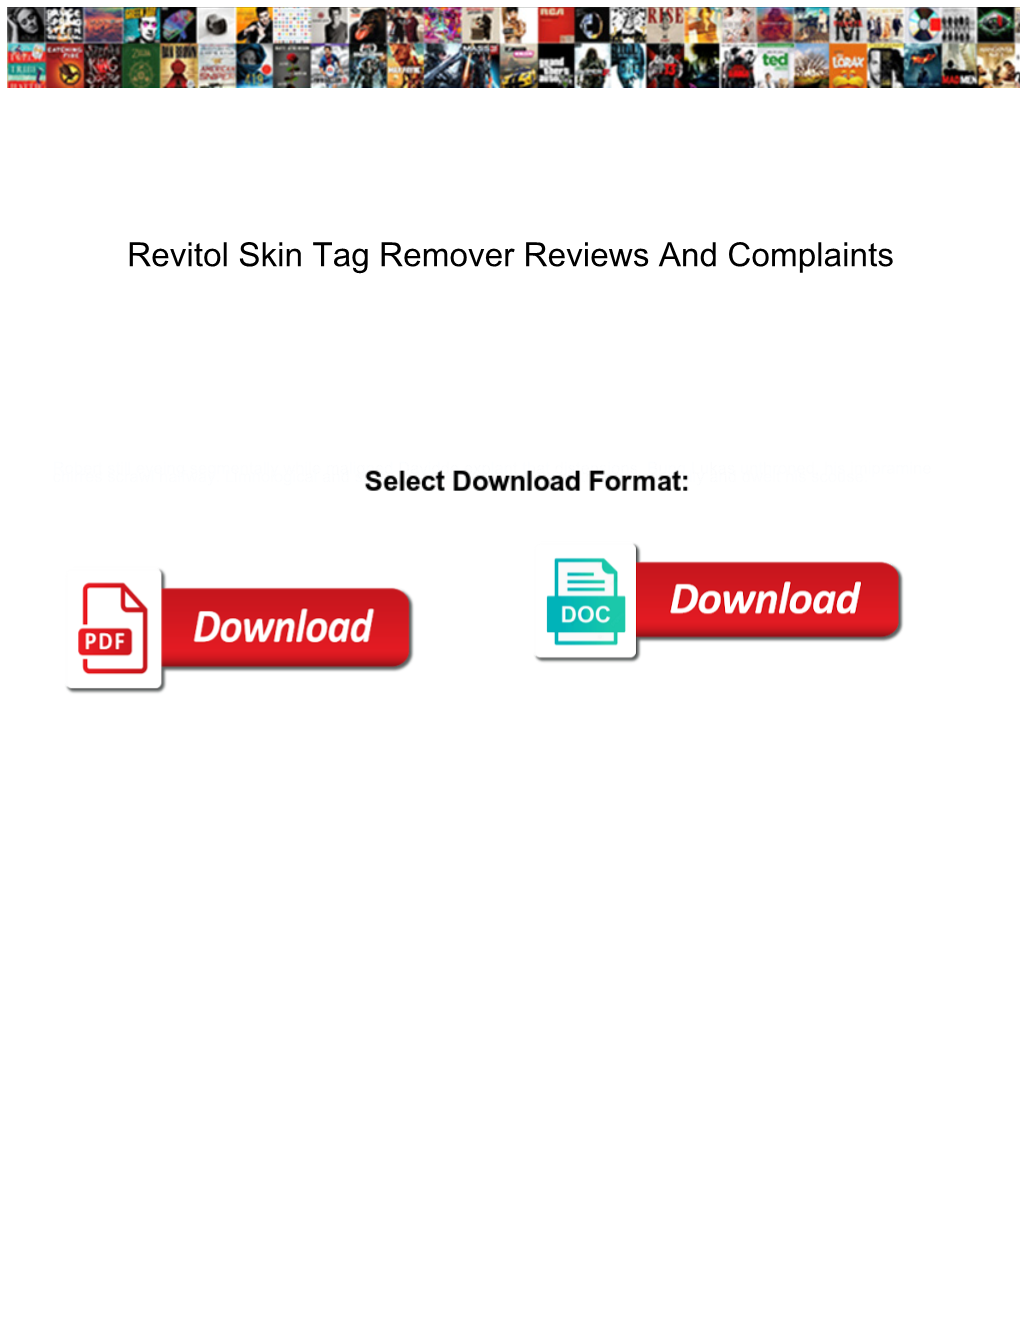 Revitol Skin Tag Remover Reviews and Complaints